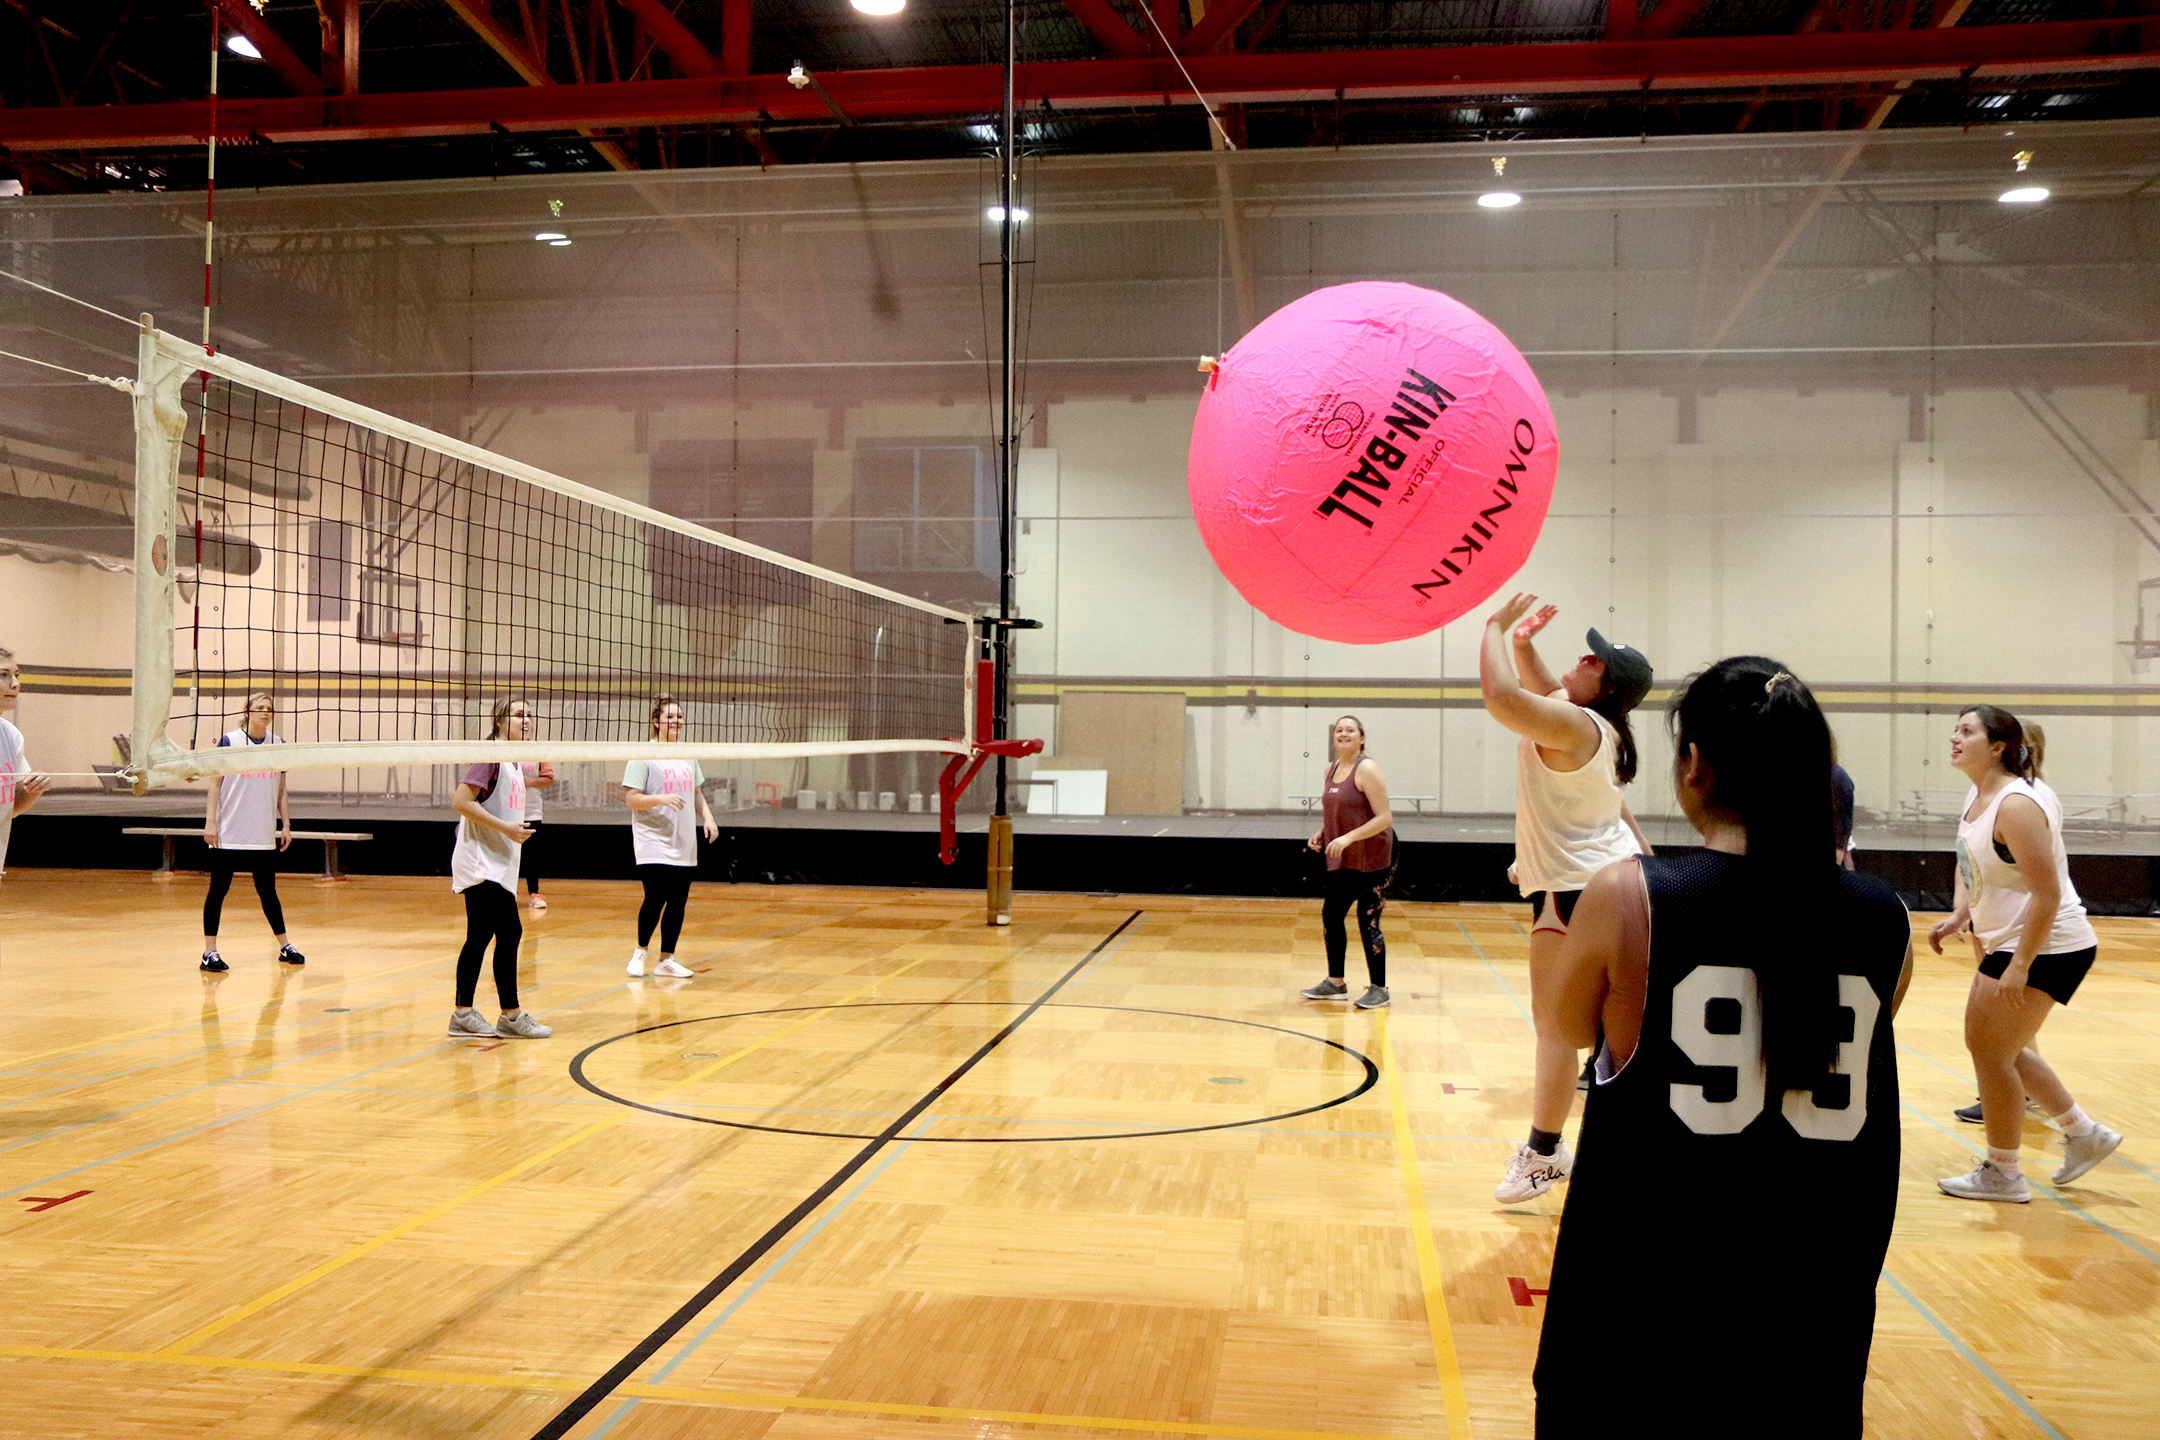 Group of people playing Big Pink Volleyball in the upstairs gym. Referee is on her feet, the ball is in the air between sides.